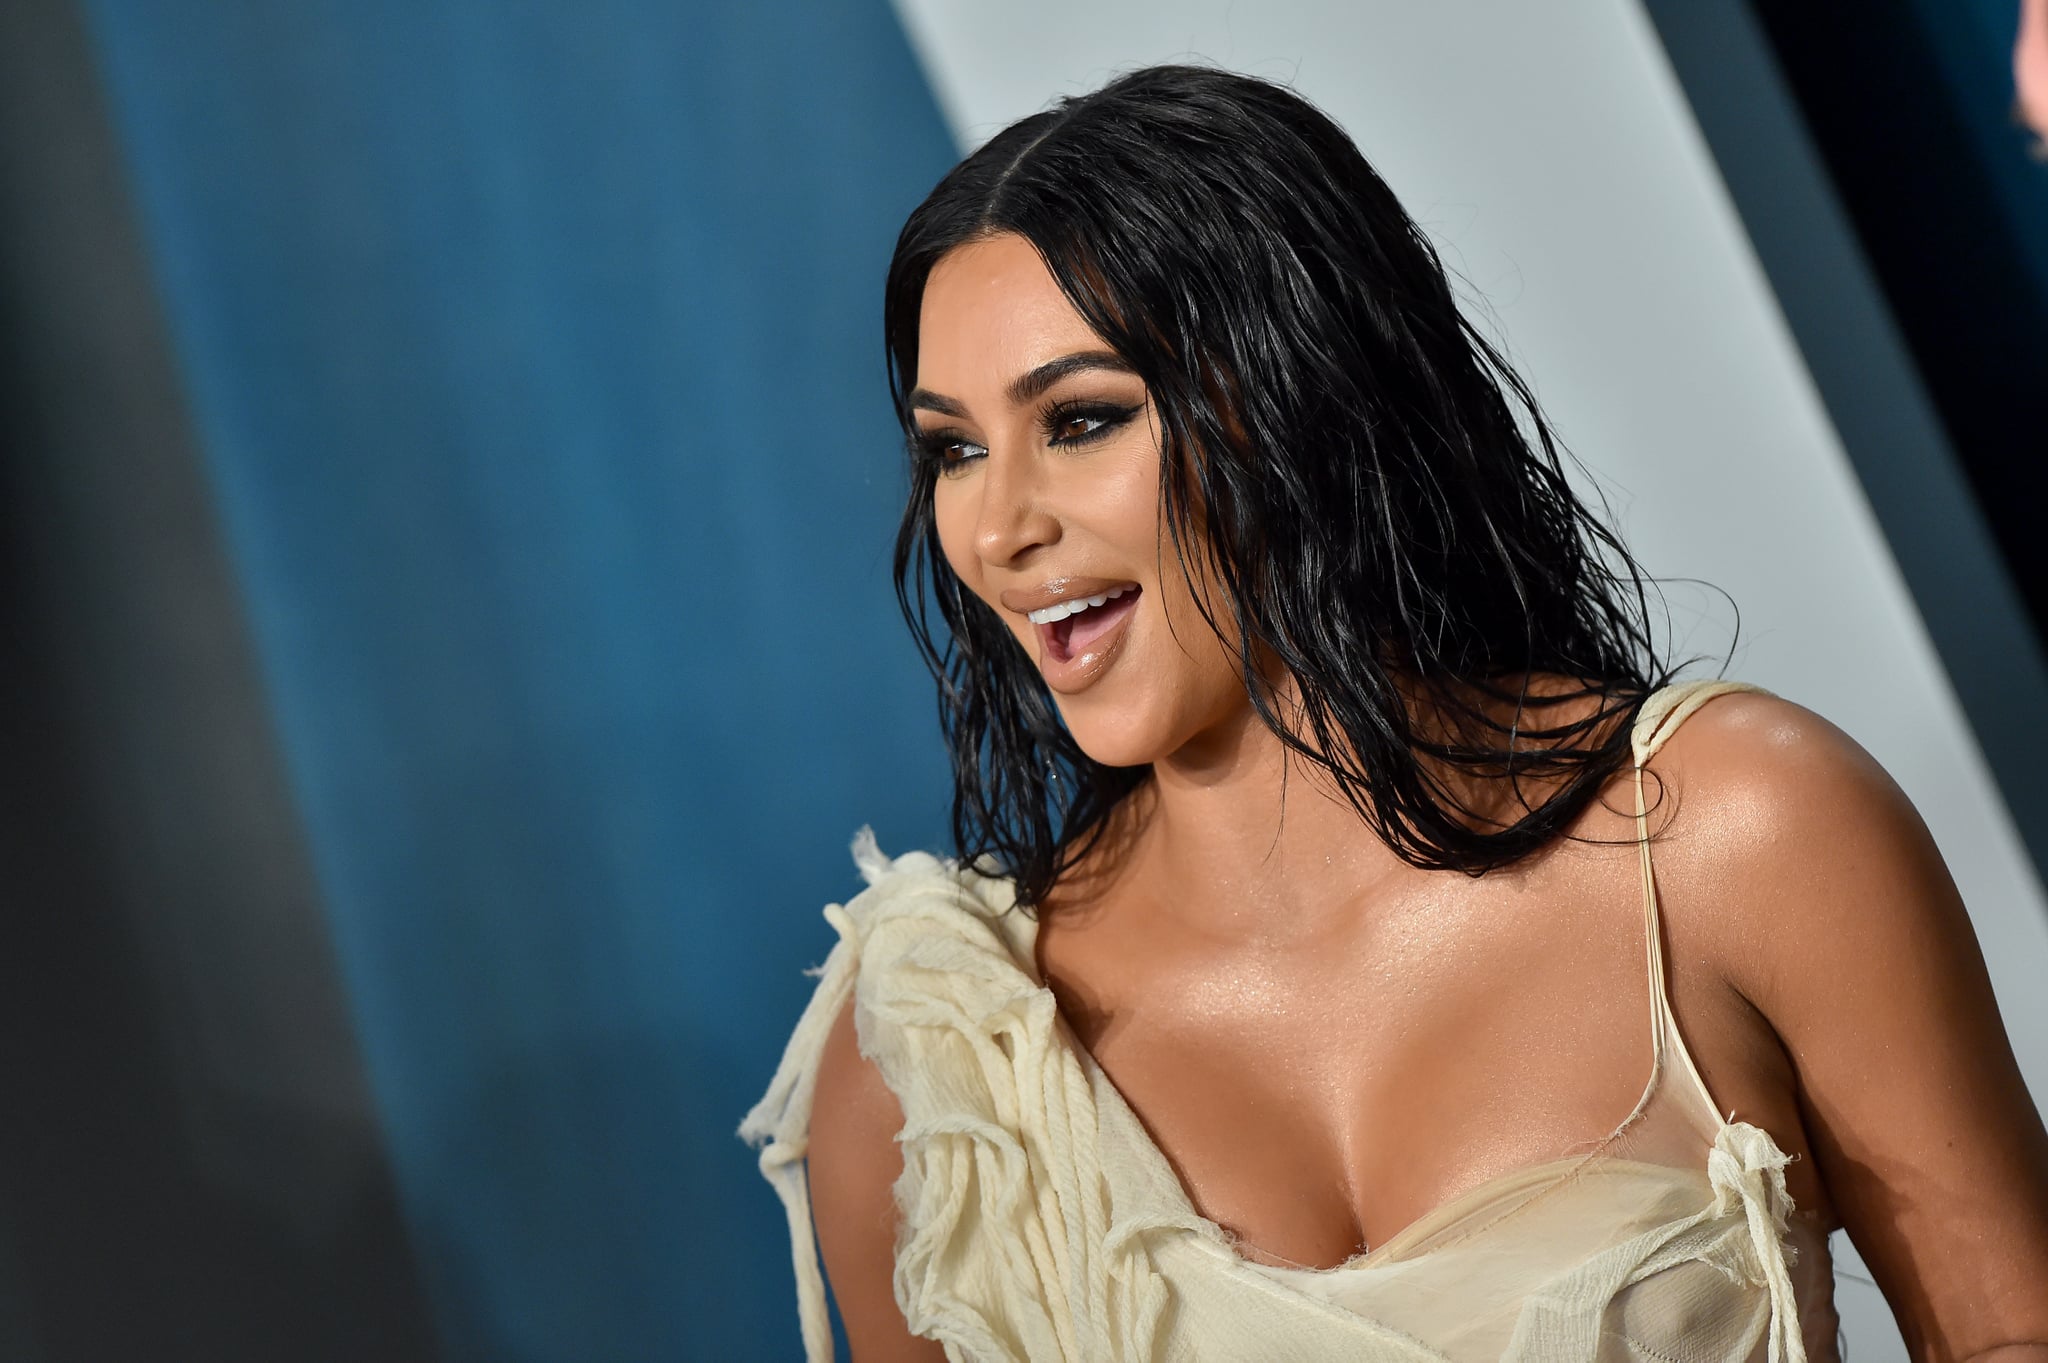 BEVERLY HILLS, CALIFORNIA - FEBRUARY 09: Kim Kardashian West attends the 2020 Vanity Fair Oscar Party hosted by Radhika Jones at Wallis Annenberg Center for the Performing Arts on February 09, 2020 in Beverly Hills, California. (Photo by Axelle/Bauer-Griffin/FilmMagic)